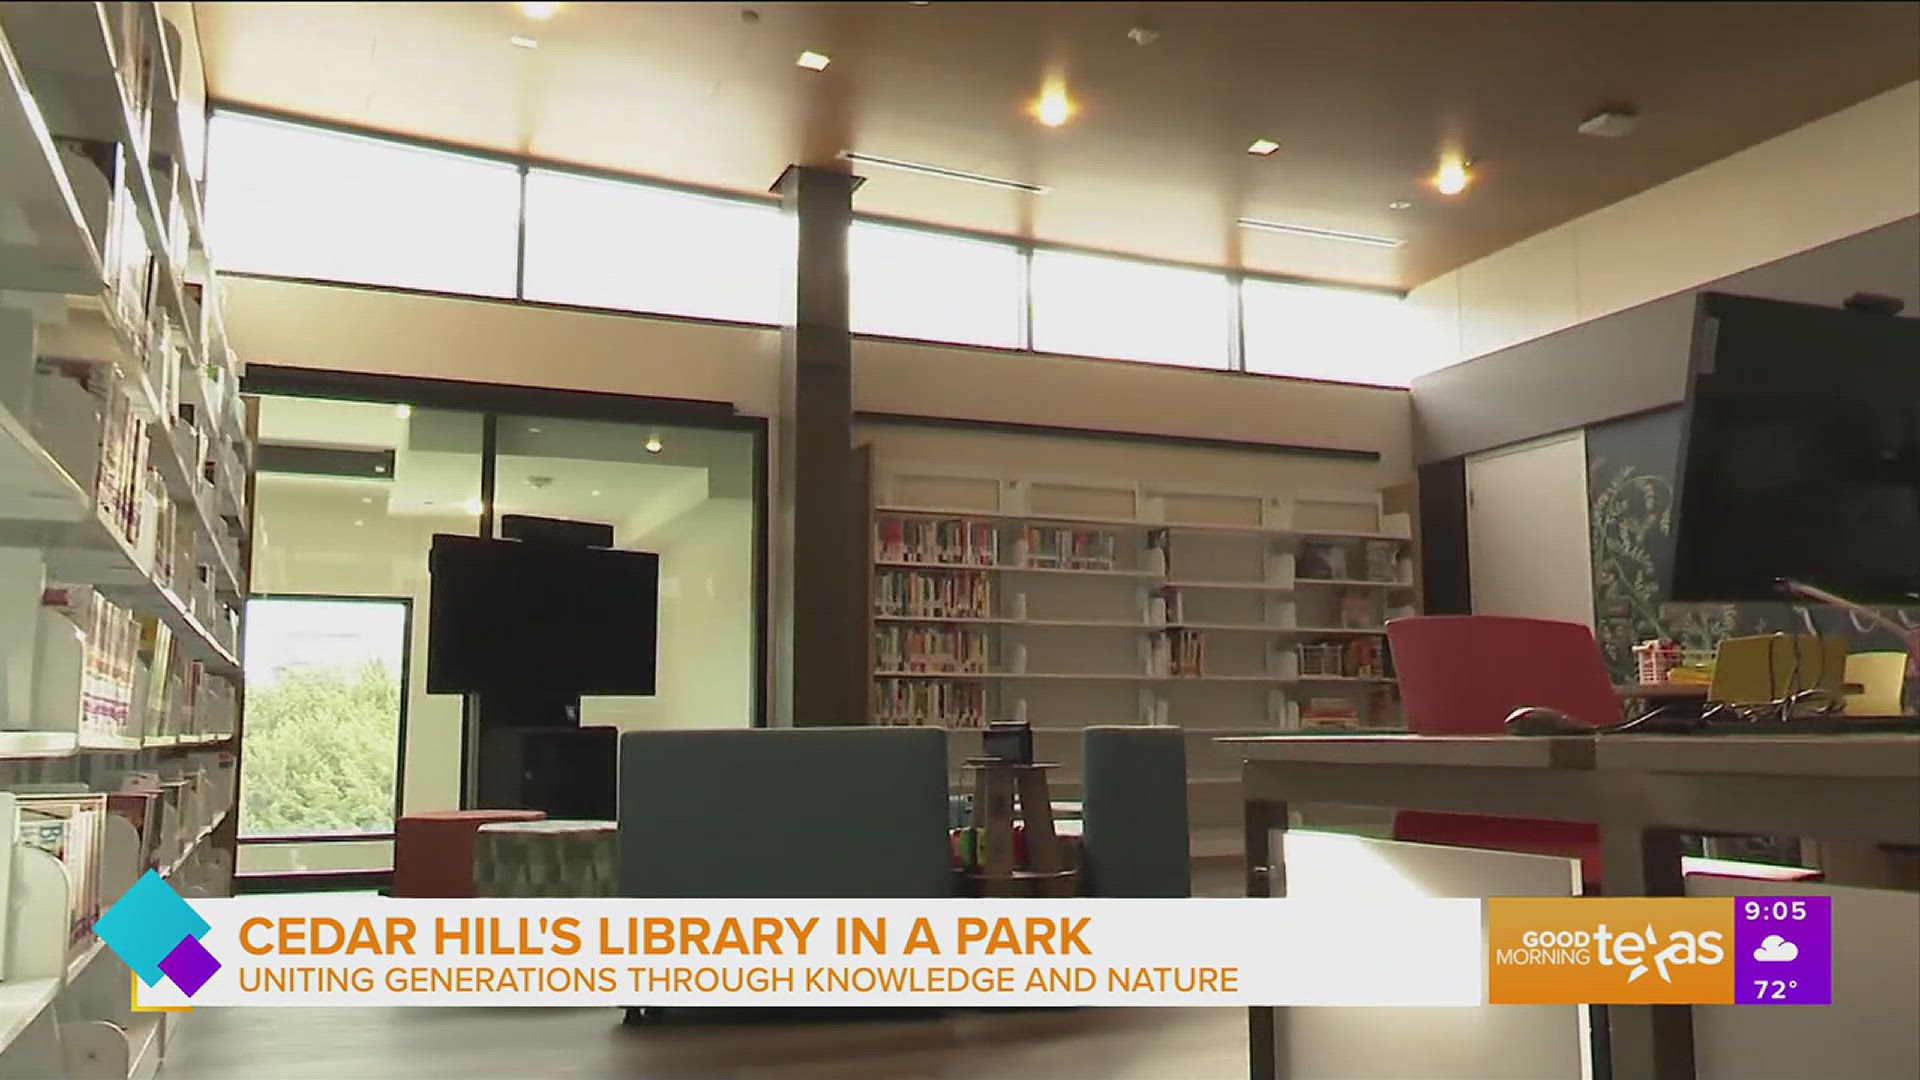 Paige takes us to Cedar Hill's "Library In a Park" ahead of their ribbon cutting ceremony.